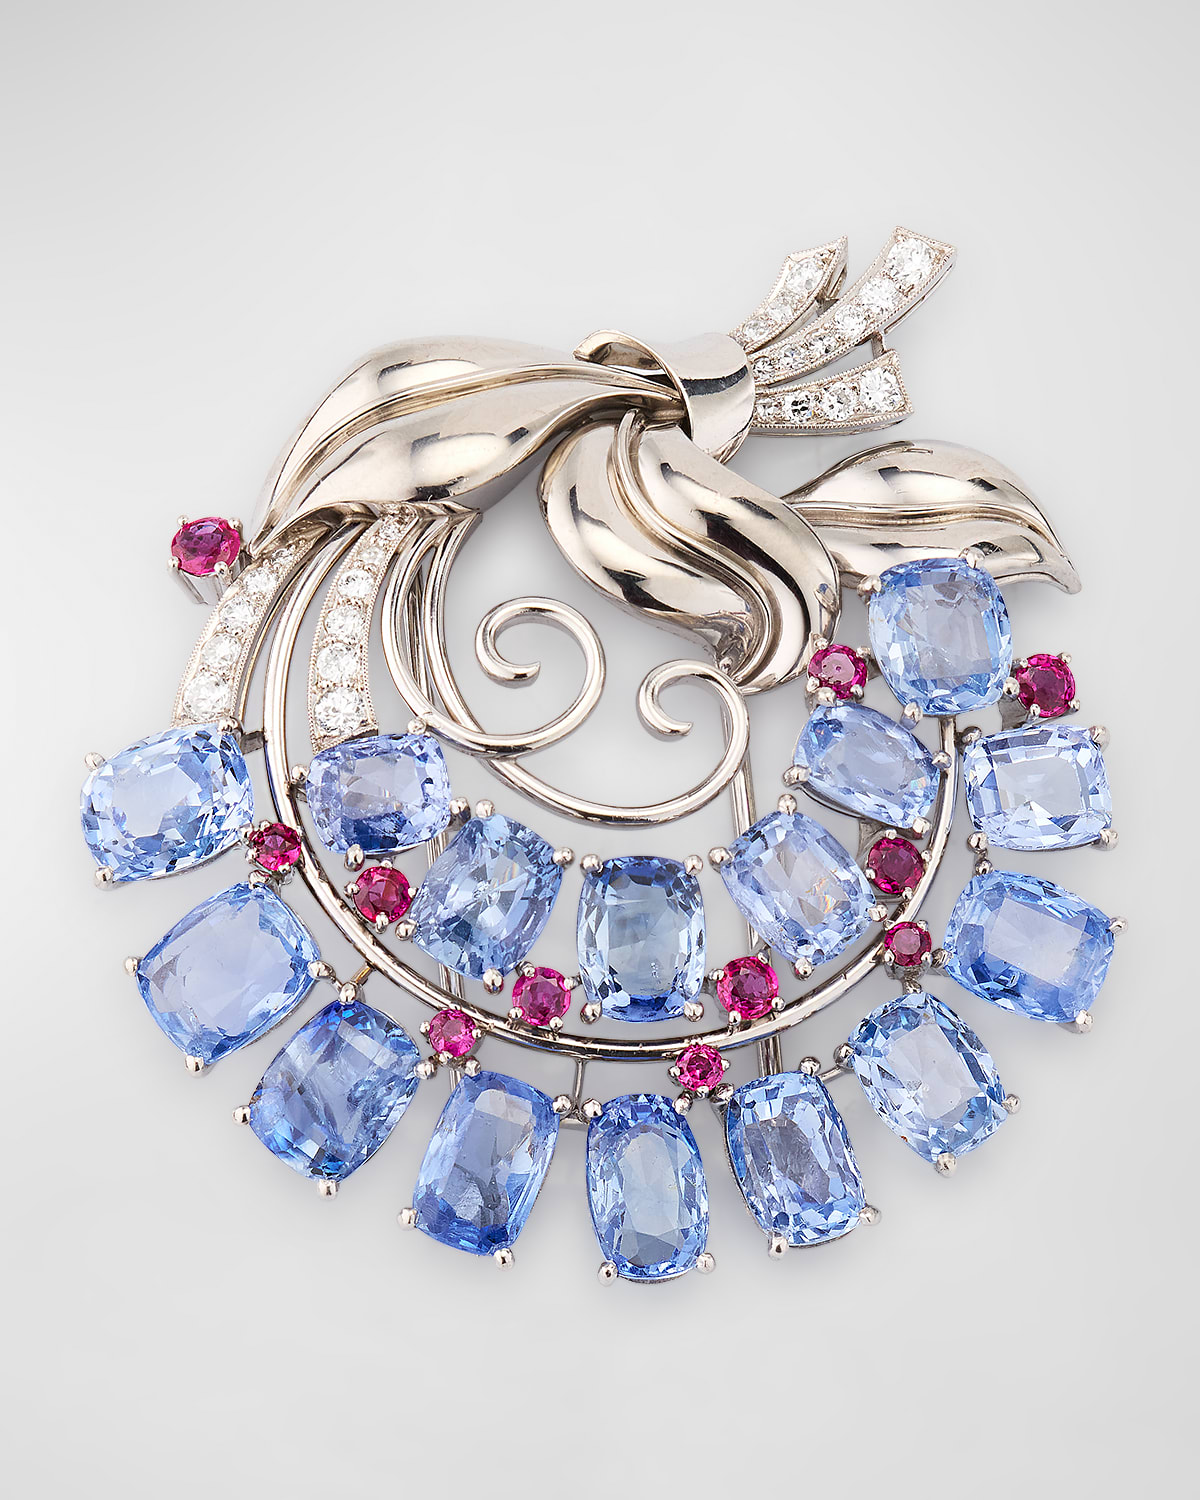 Estate Platinum and Palladium Floral Pin with Sapphires, Diamonds and Rubies